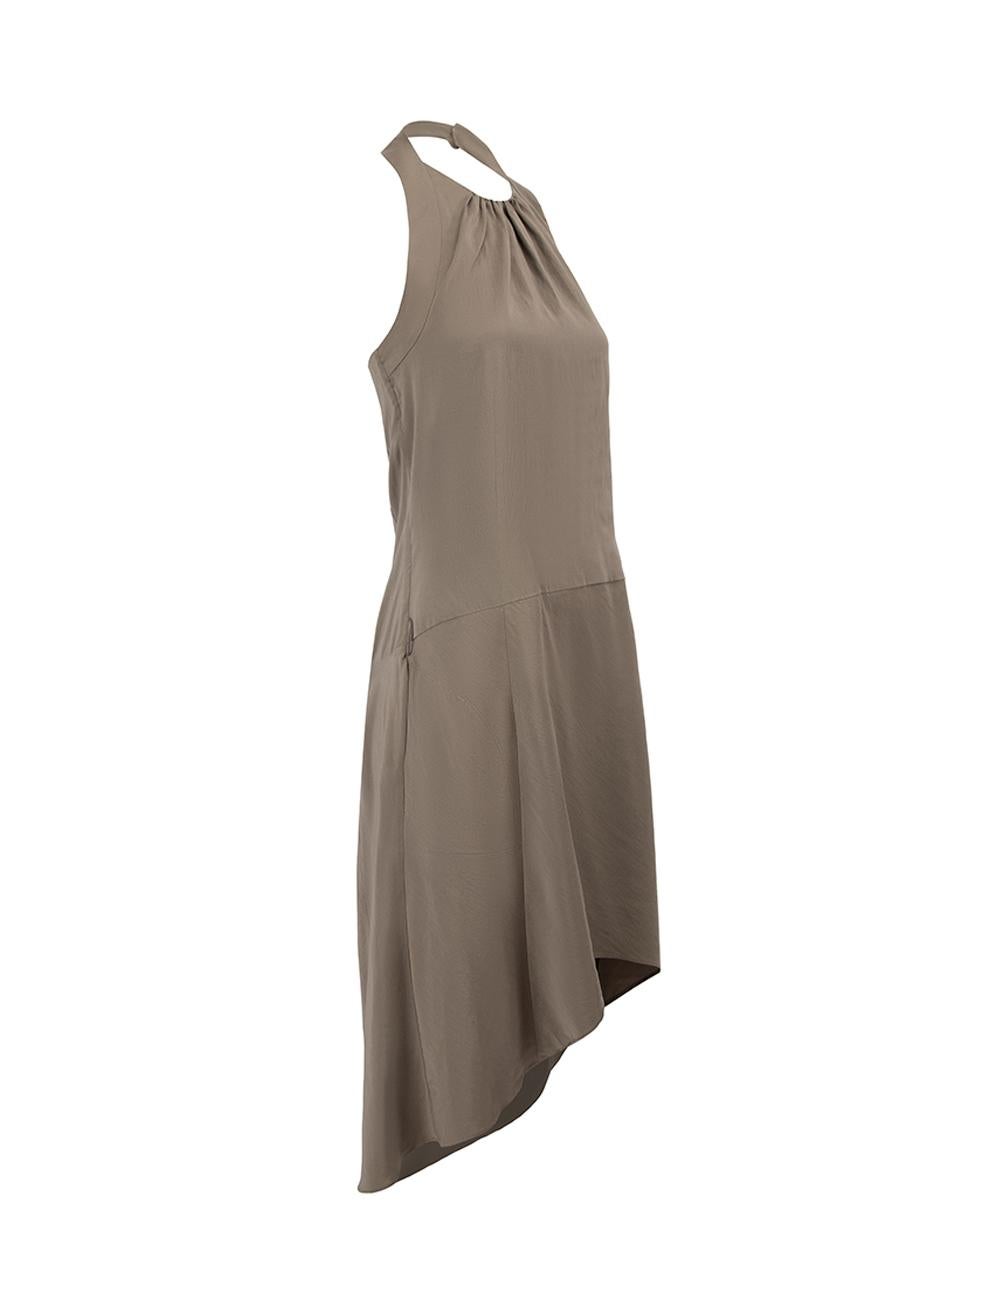 CONDITION is Very good. Minimal wear to dress is evident. Minimal wear to front with faint marks and missing belt on this used Brunello Cucinelli designer resale item.




Details


Grey

Silk

Knee length dress

Halterneck

Open back

Front side